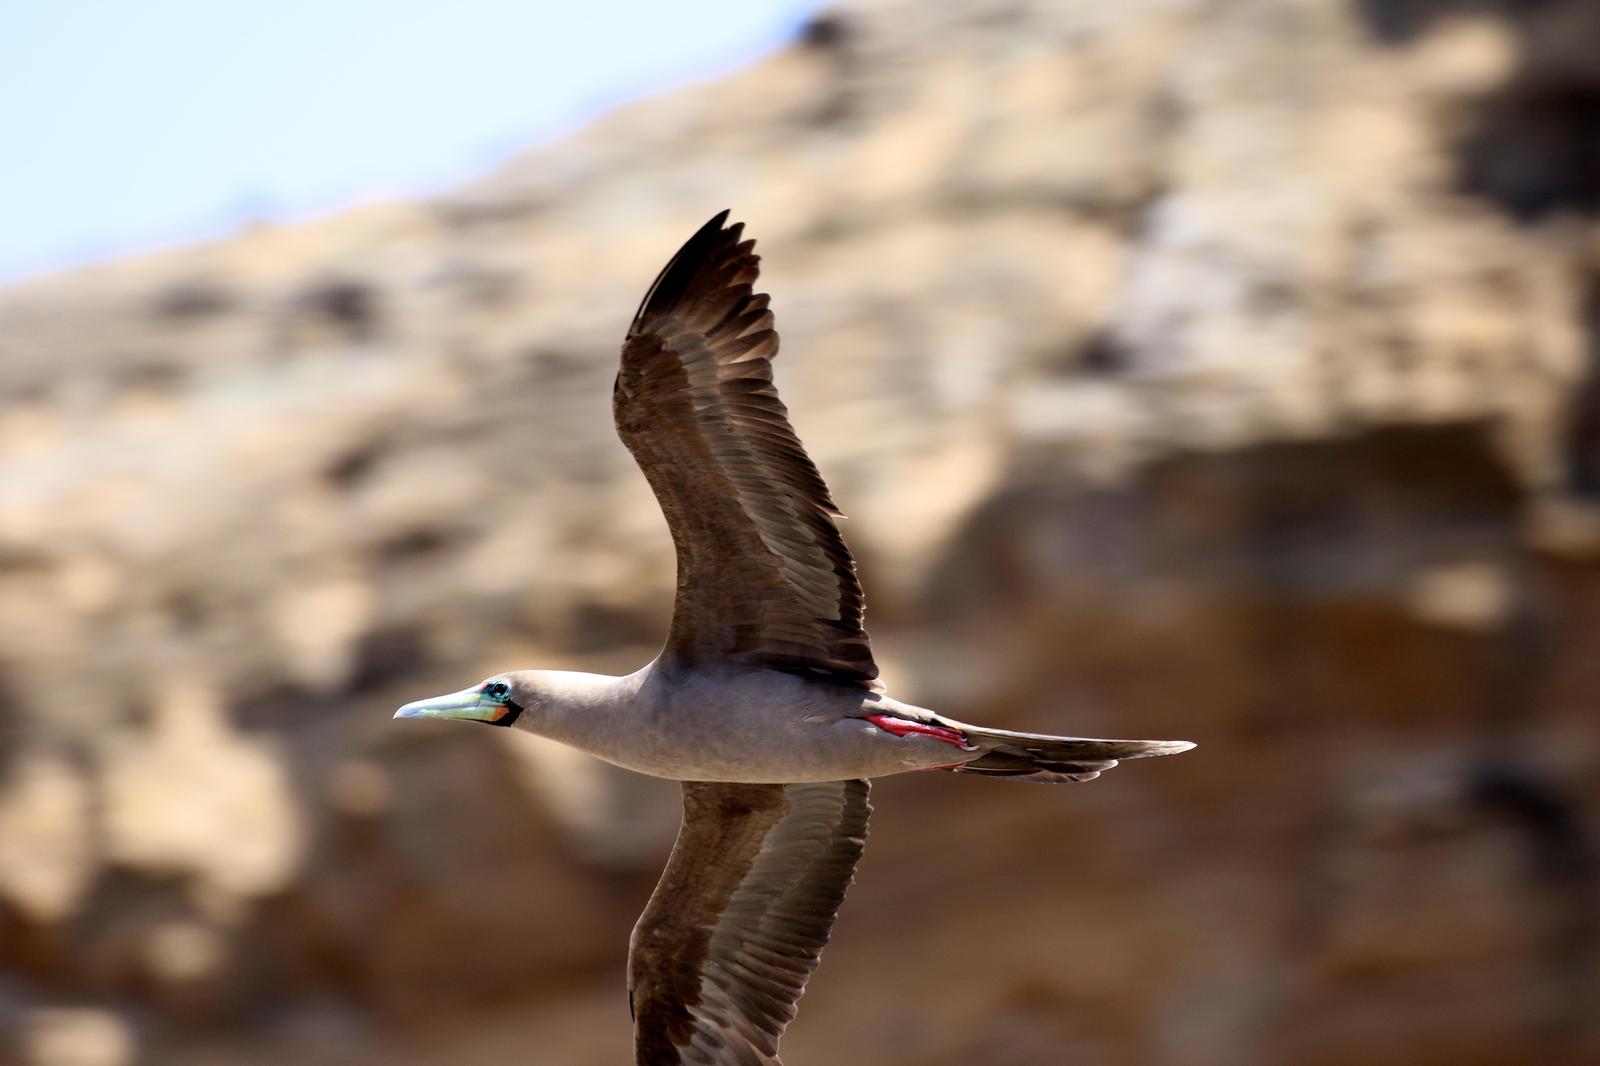 Red-footed Booby Photo by Jon Trachtenberg